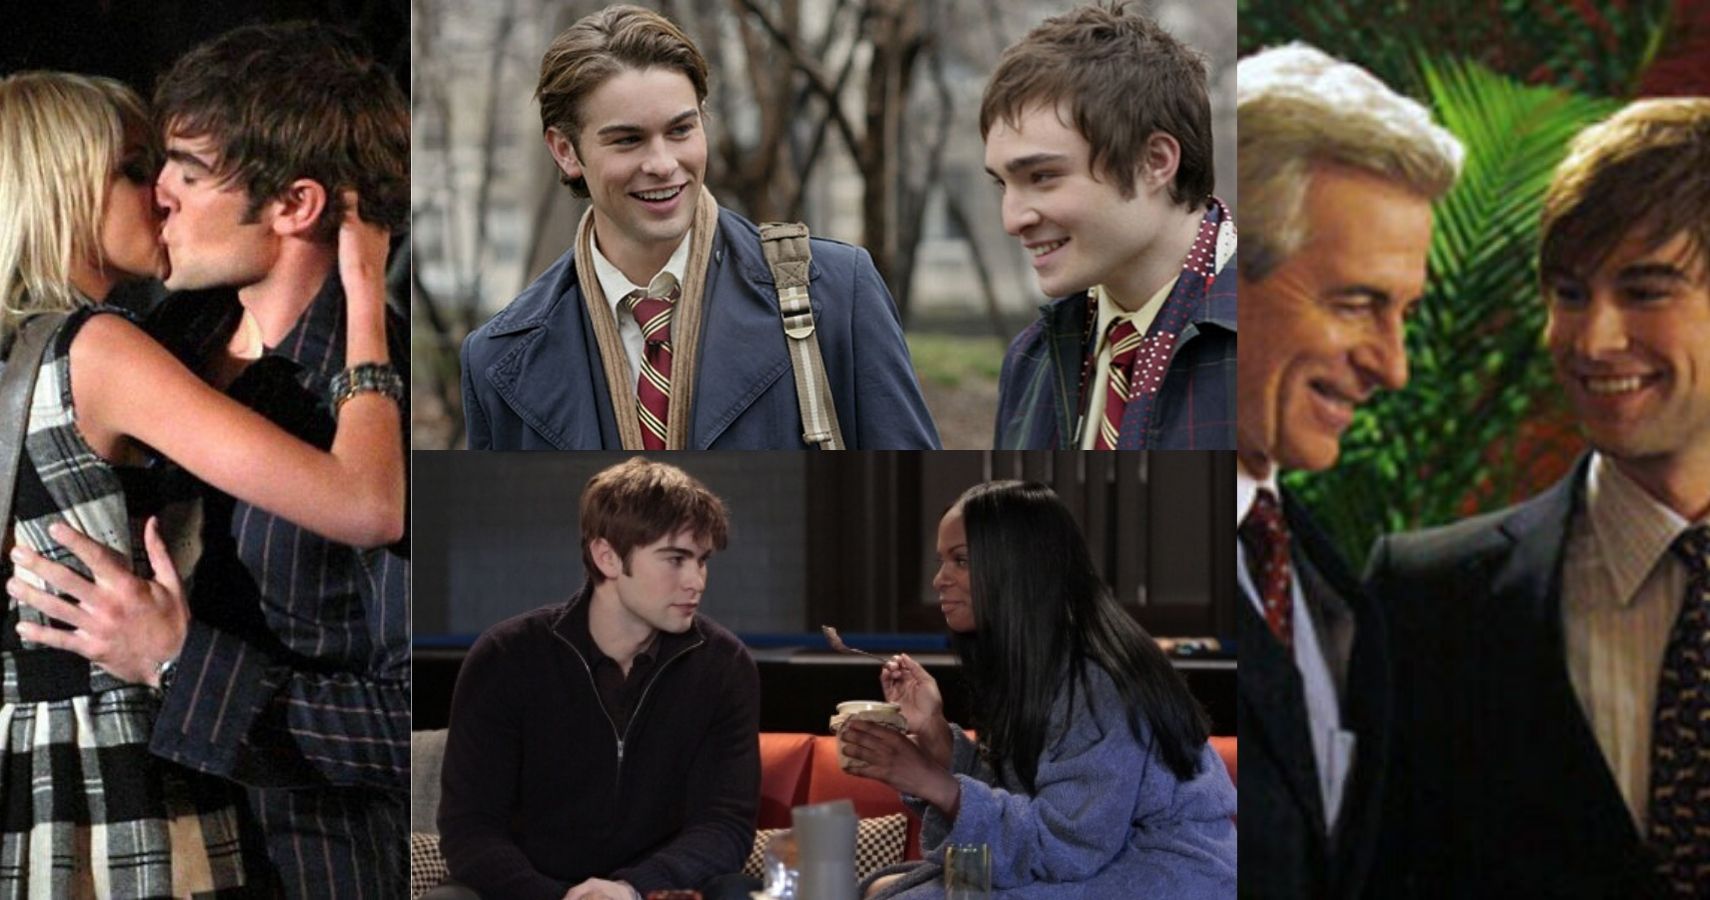 Gossip Girl: 10 Things About Nate That Would Never Fly Today